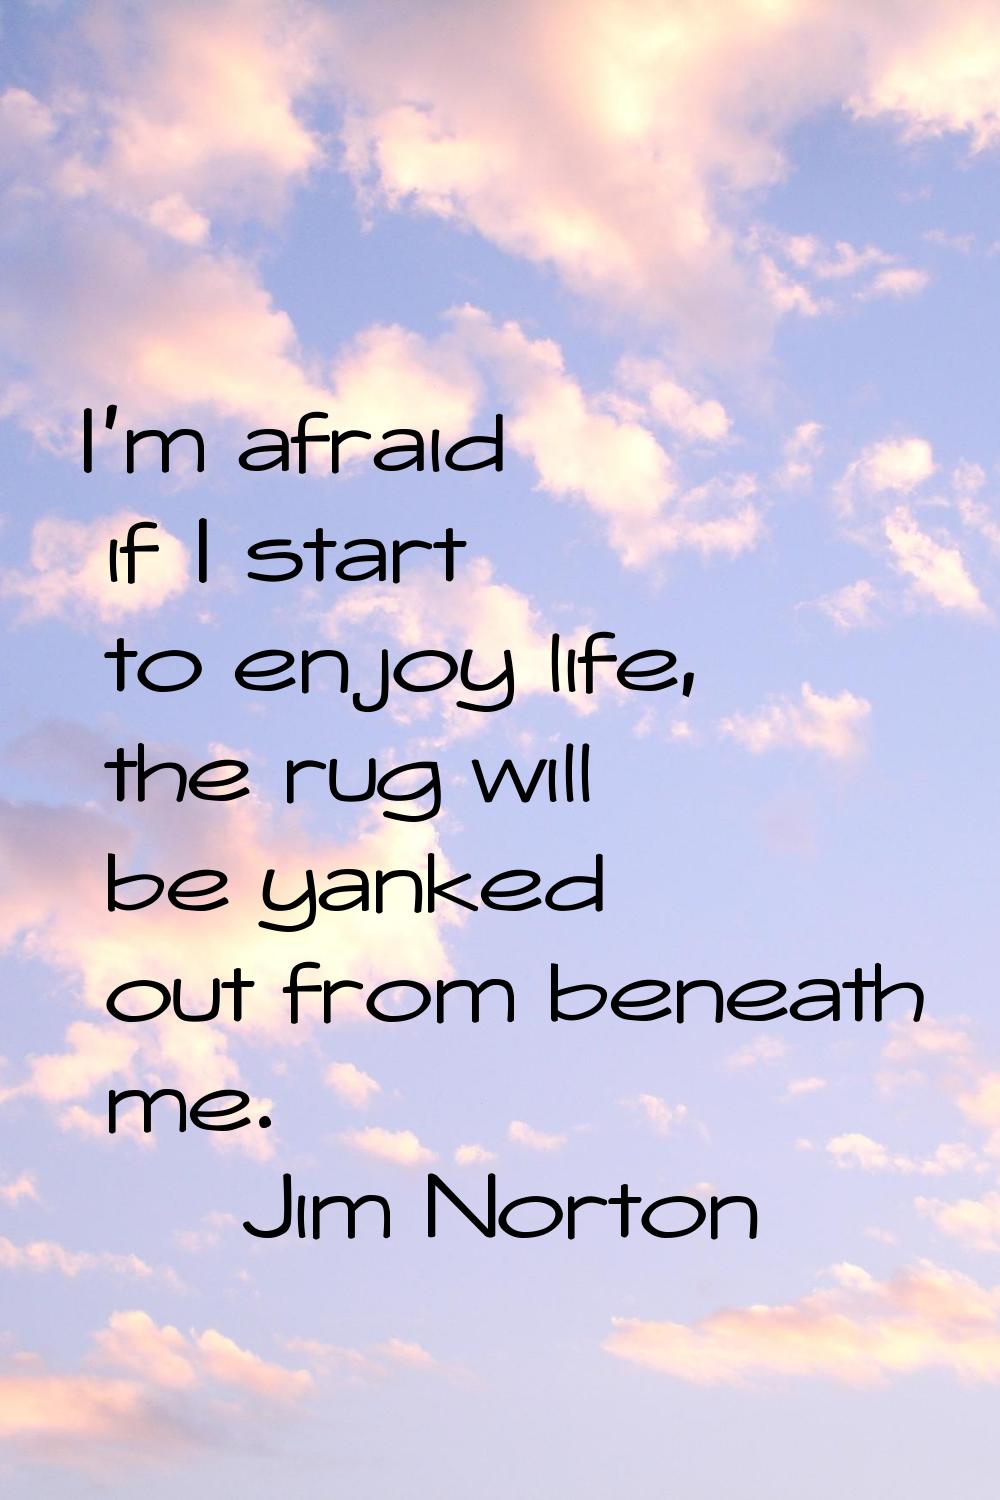 I'm afraid if I start to enjoy life, the rug will be yanked out from beneath me.